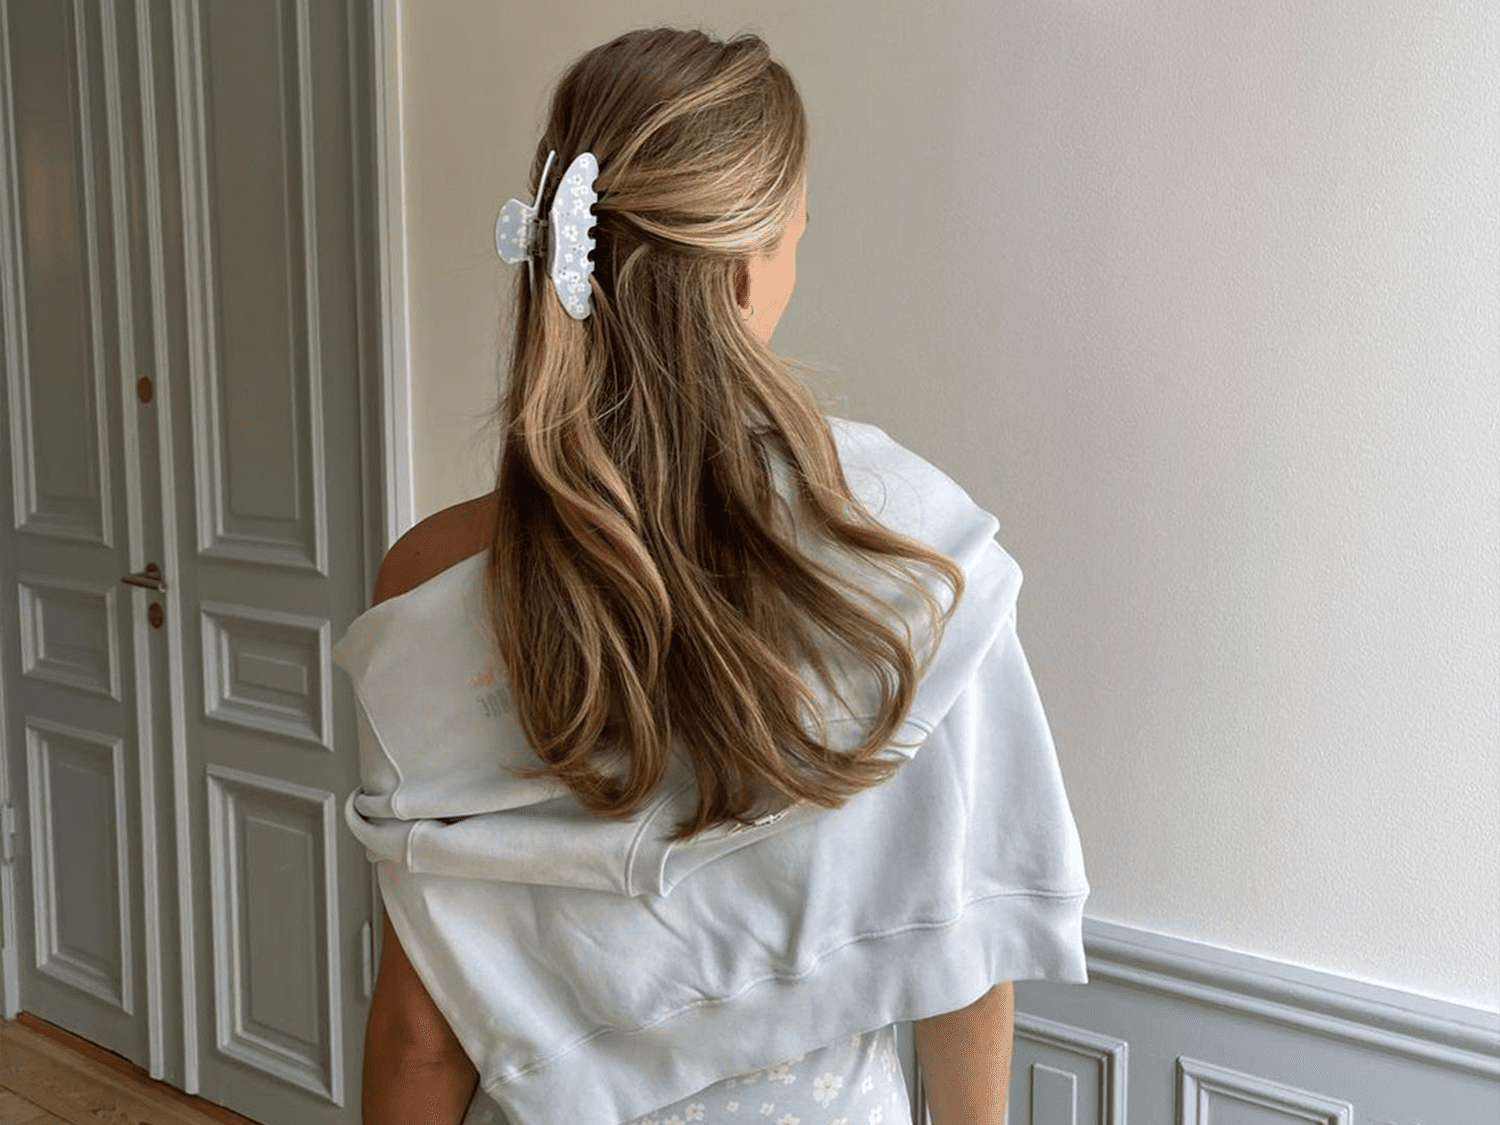 Banana Clip vs Claw Clip: Hairstylists Explain the Buzzy Hair Accessories